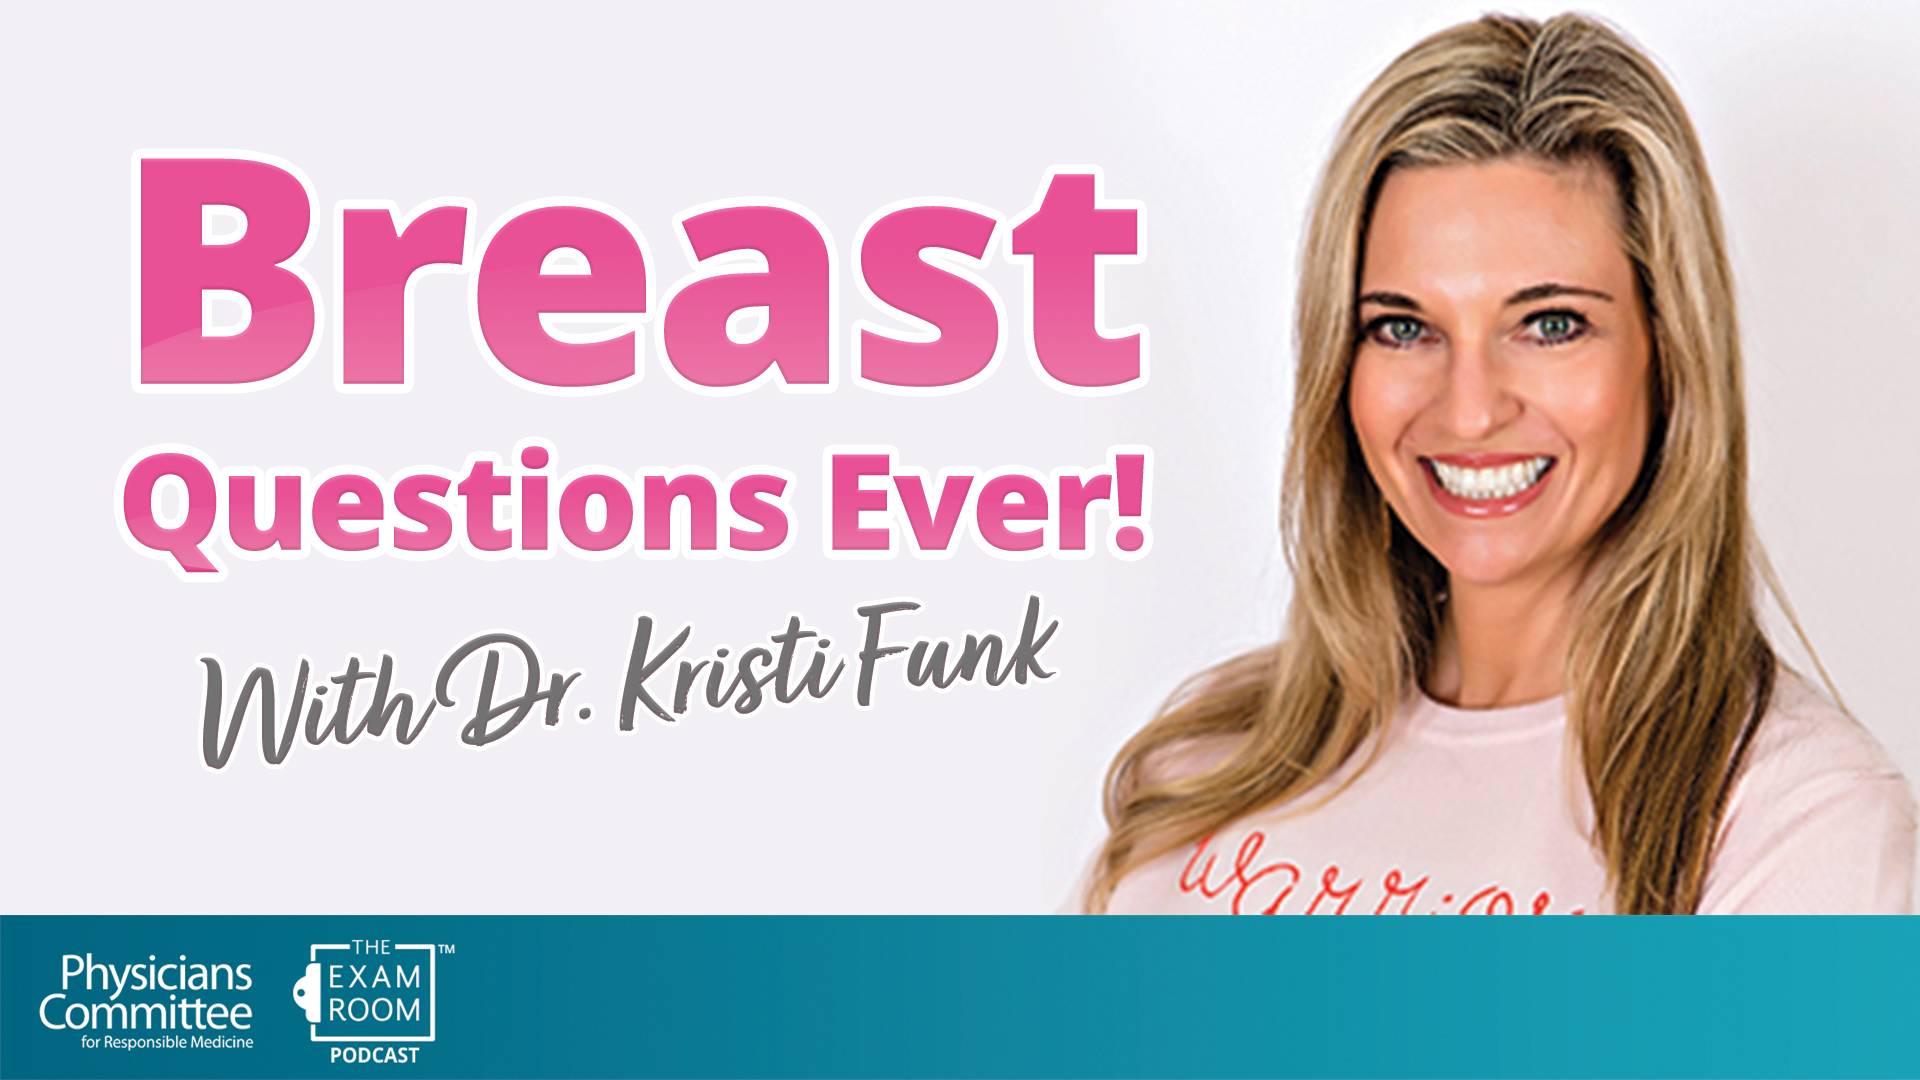 What's Best for Breasts?